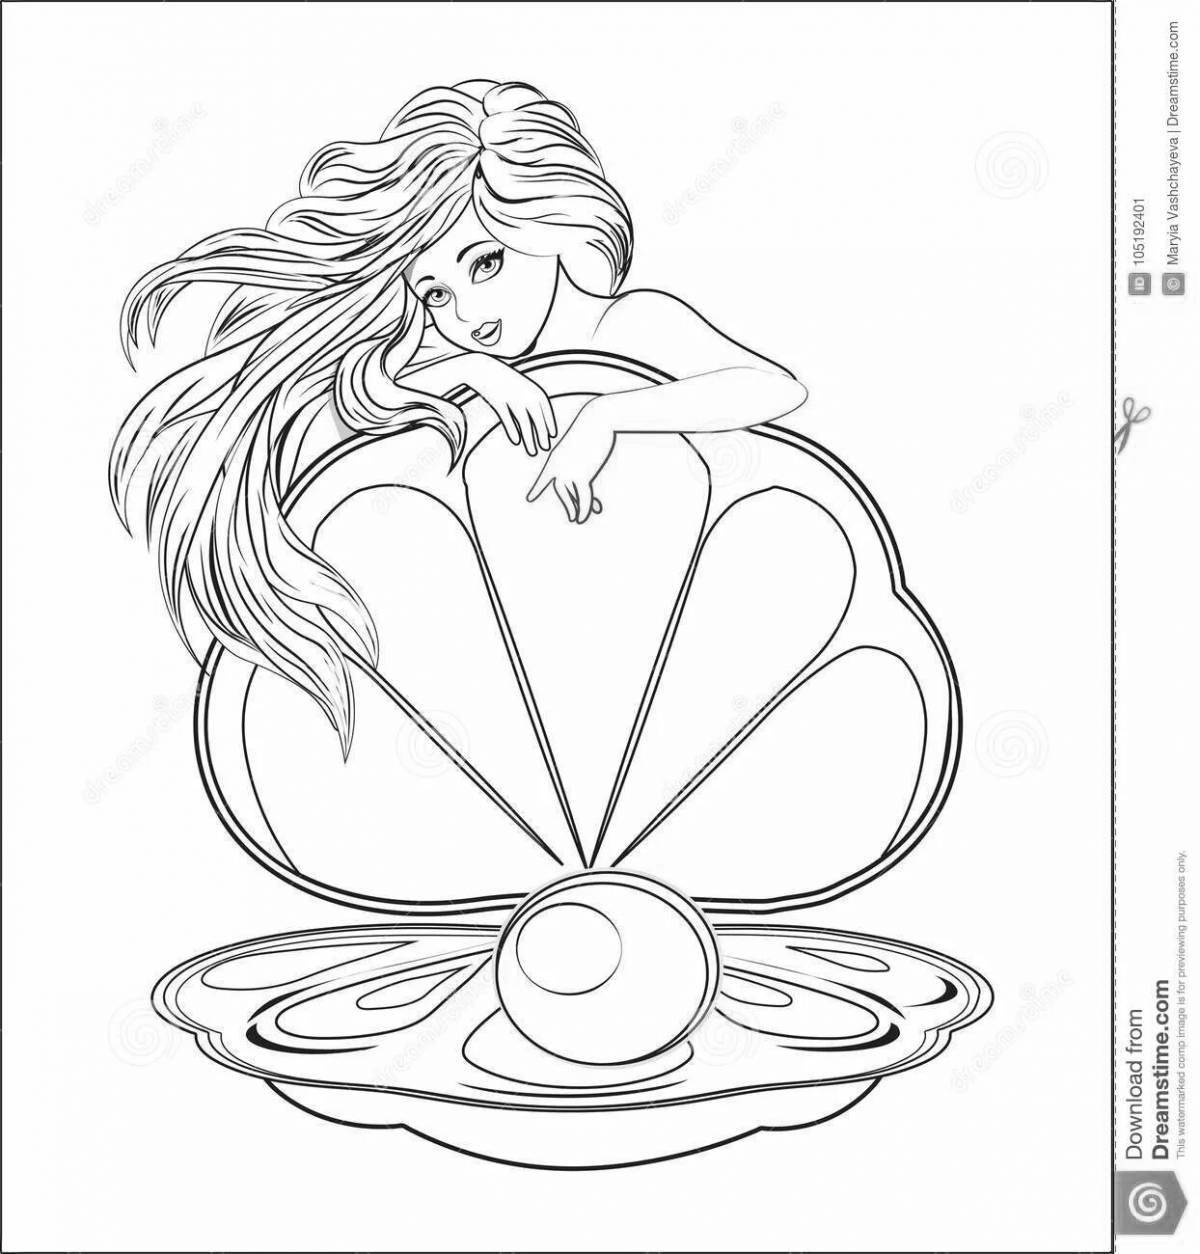 Amazing gemstone coloring page for kids